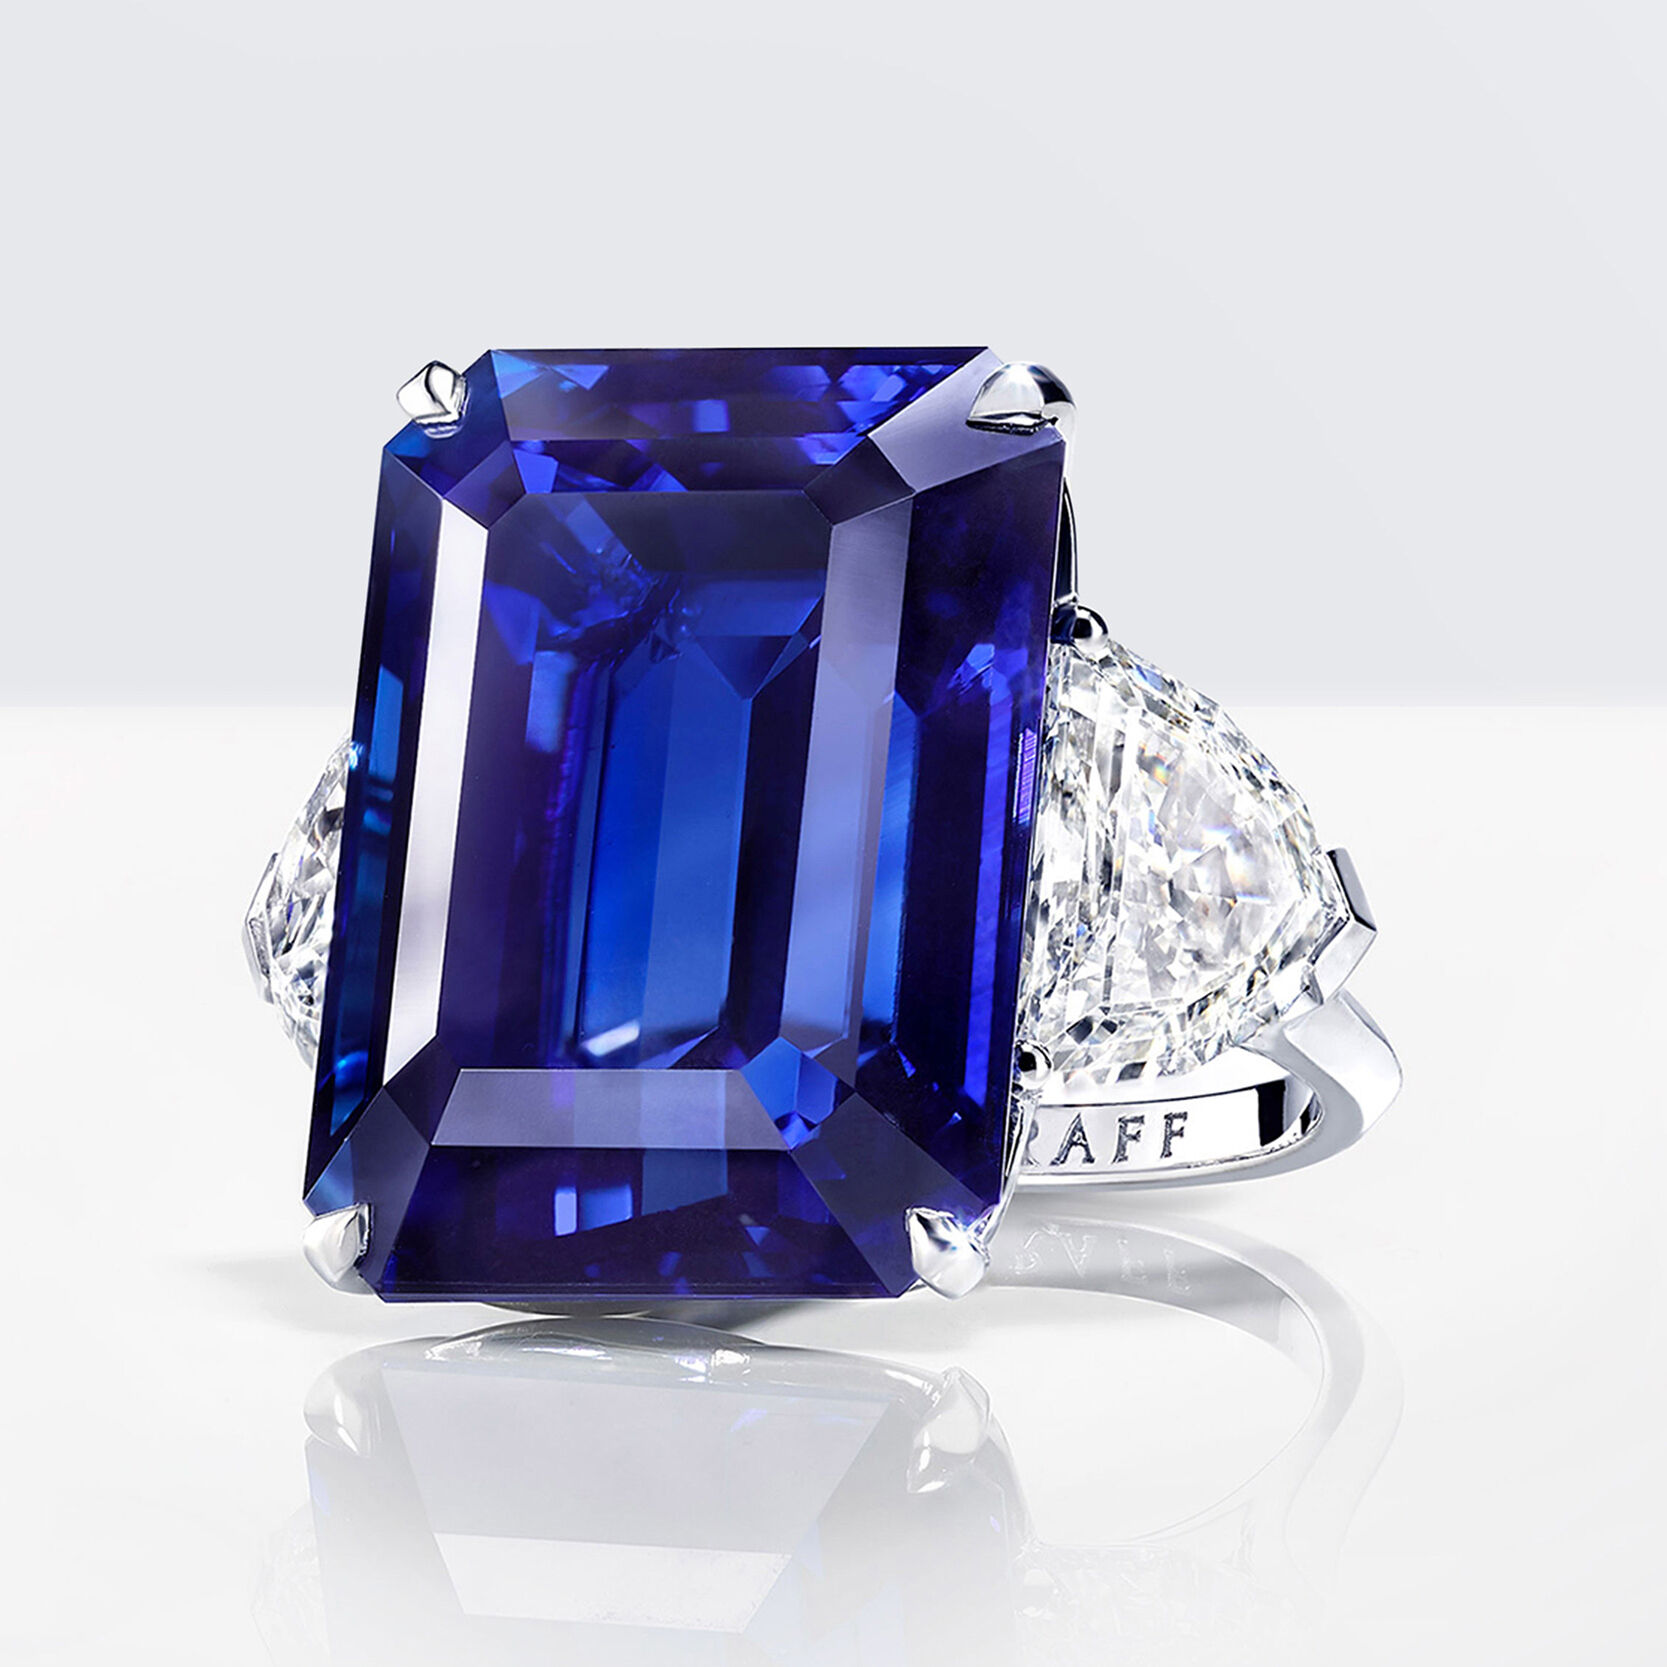 An emerald cut sapphire and white diamond ring by Graff